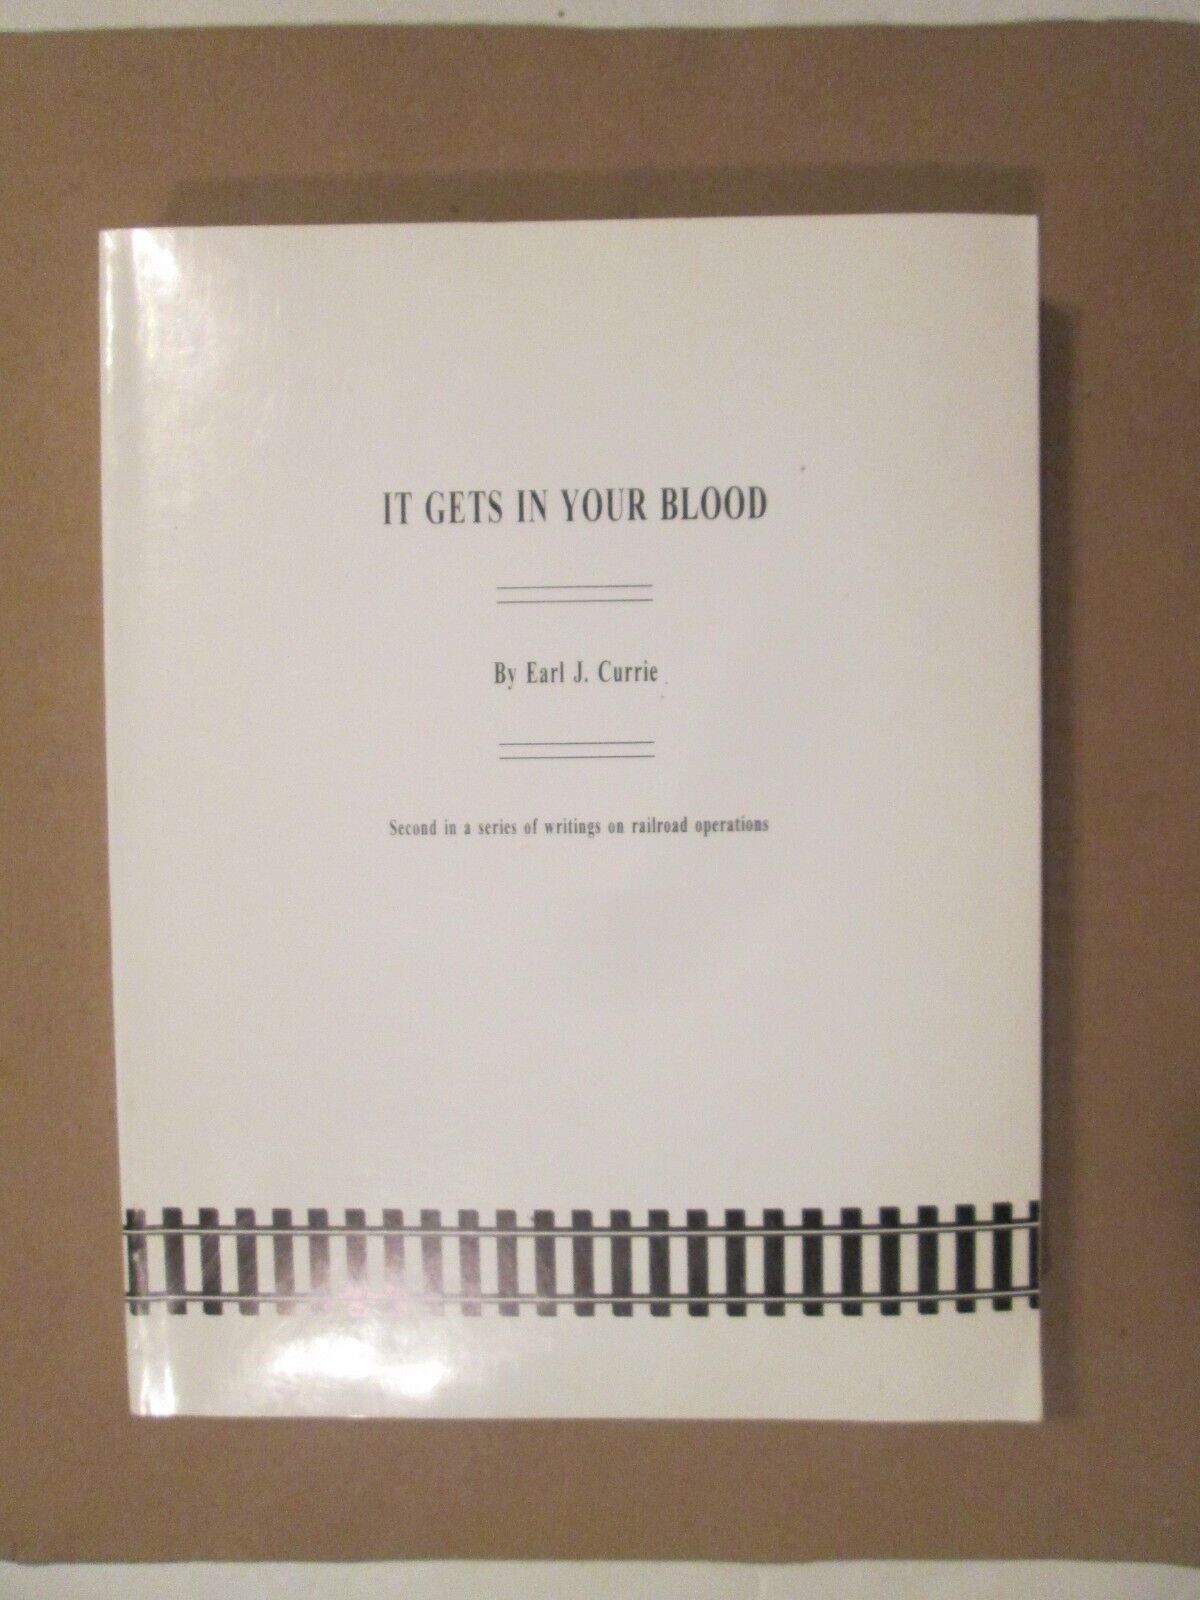 It Gets In Your Blood - Earl J. Currie - SIGNED